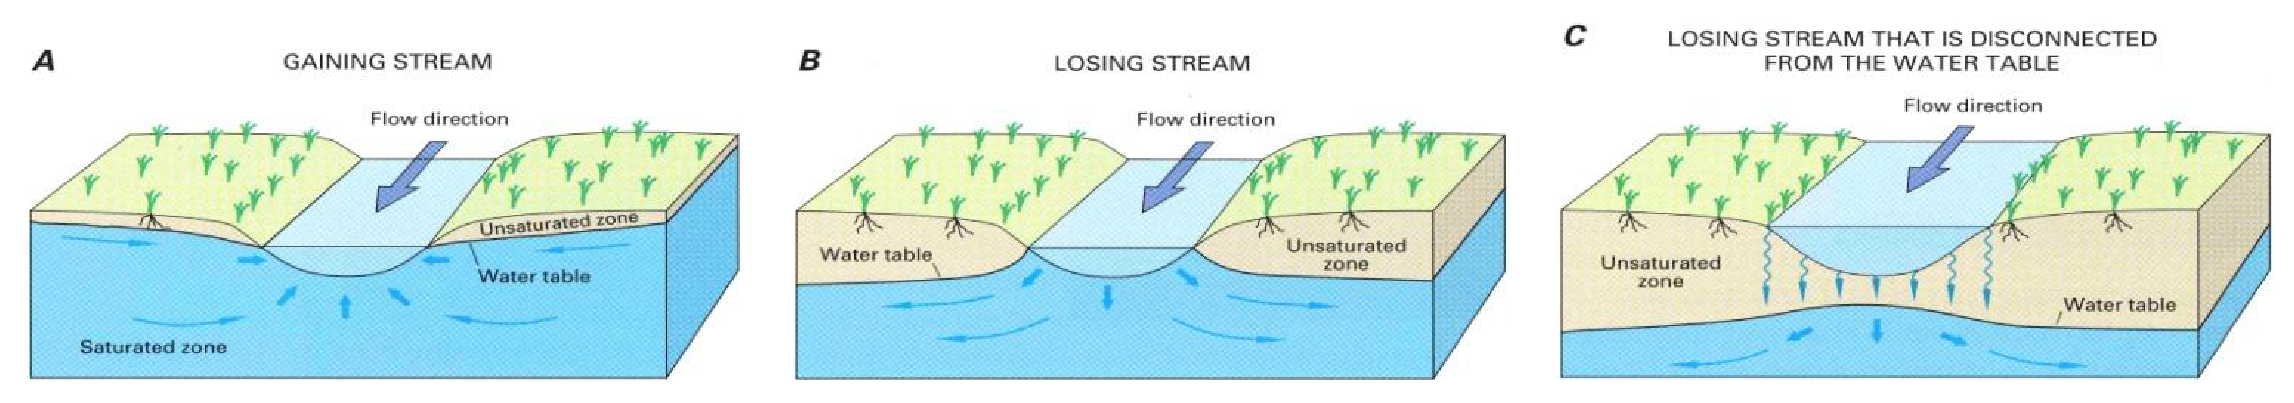 Streams can gain, lose or be disconnected from groundwater